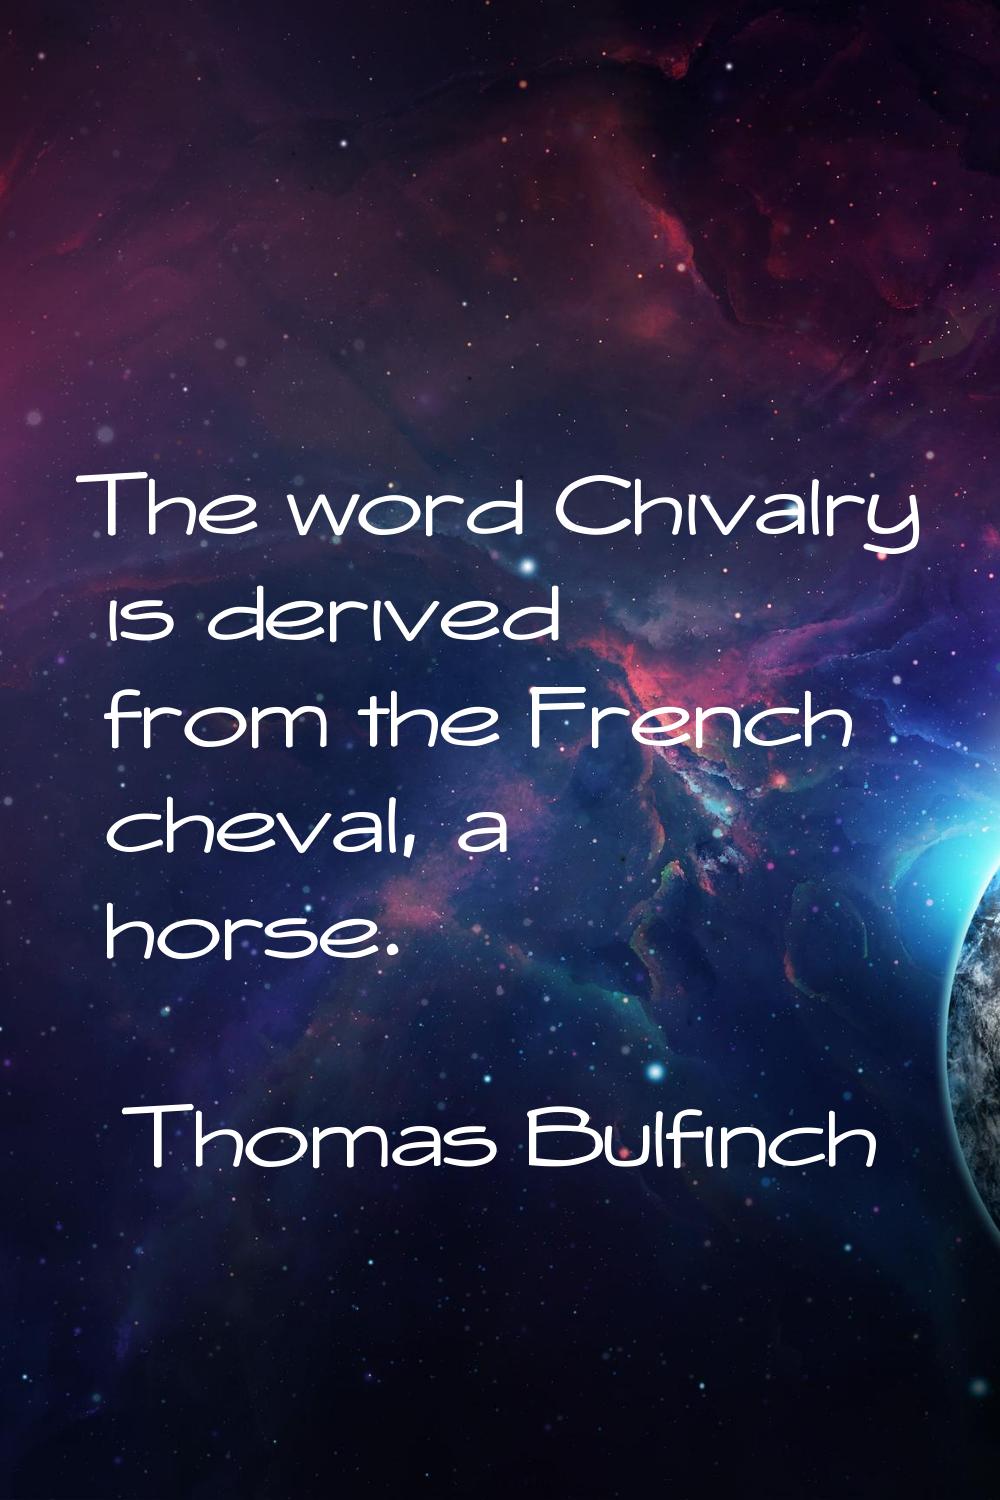 The word Chivalry is derived from the French cheval, a horse.